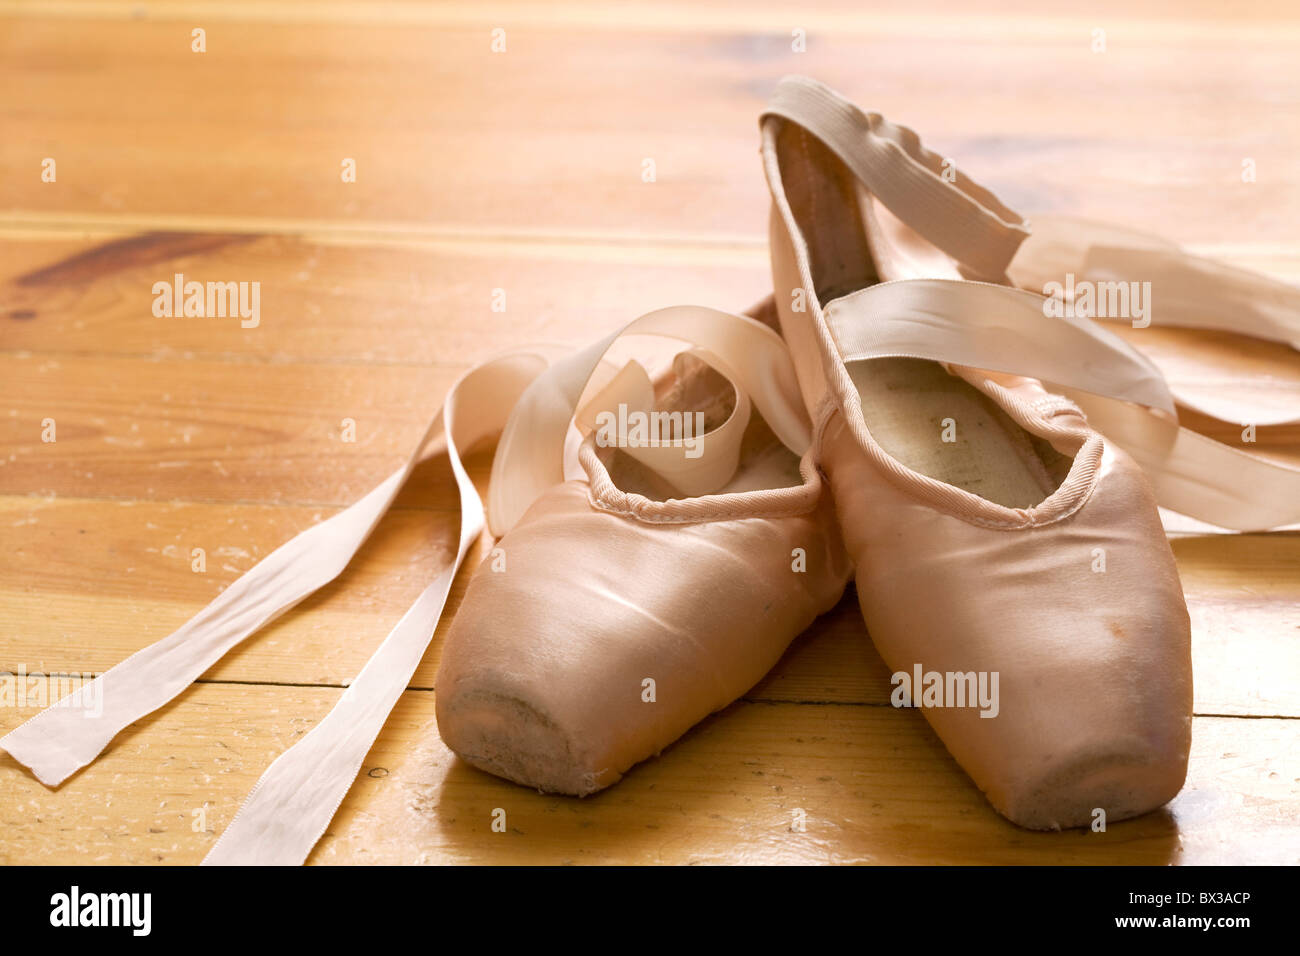 pair of ballet shoes on wooden floor Stock Photo